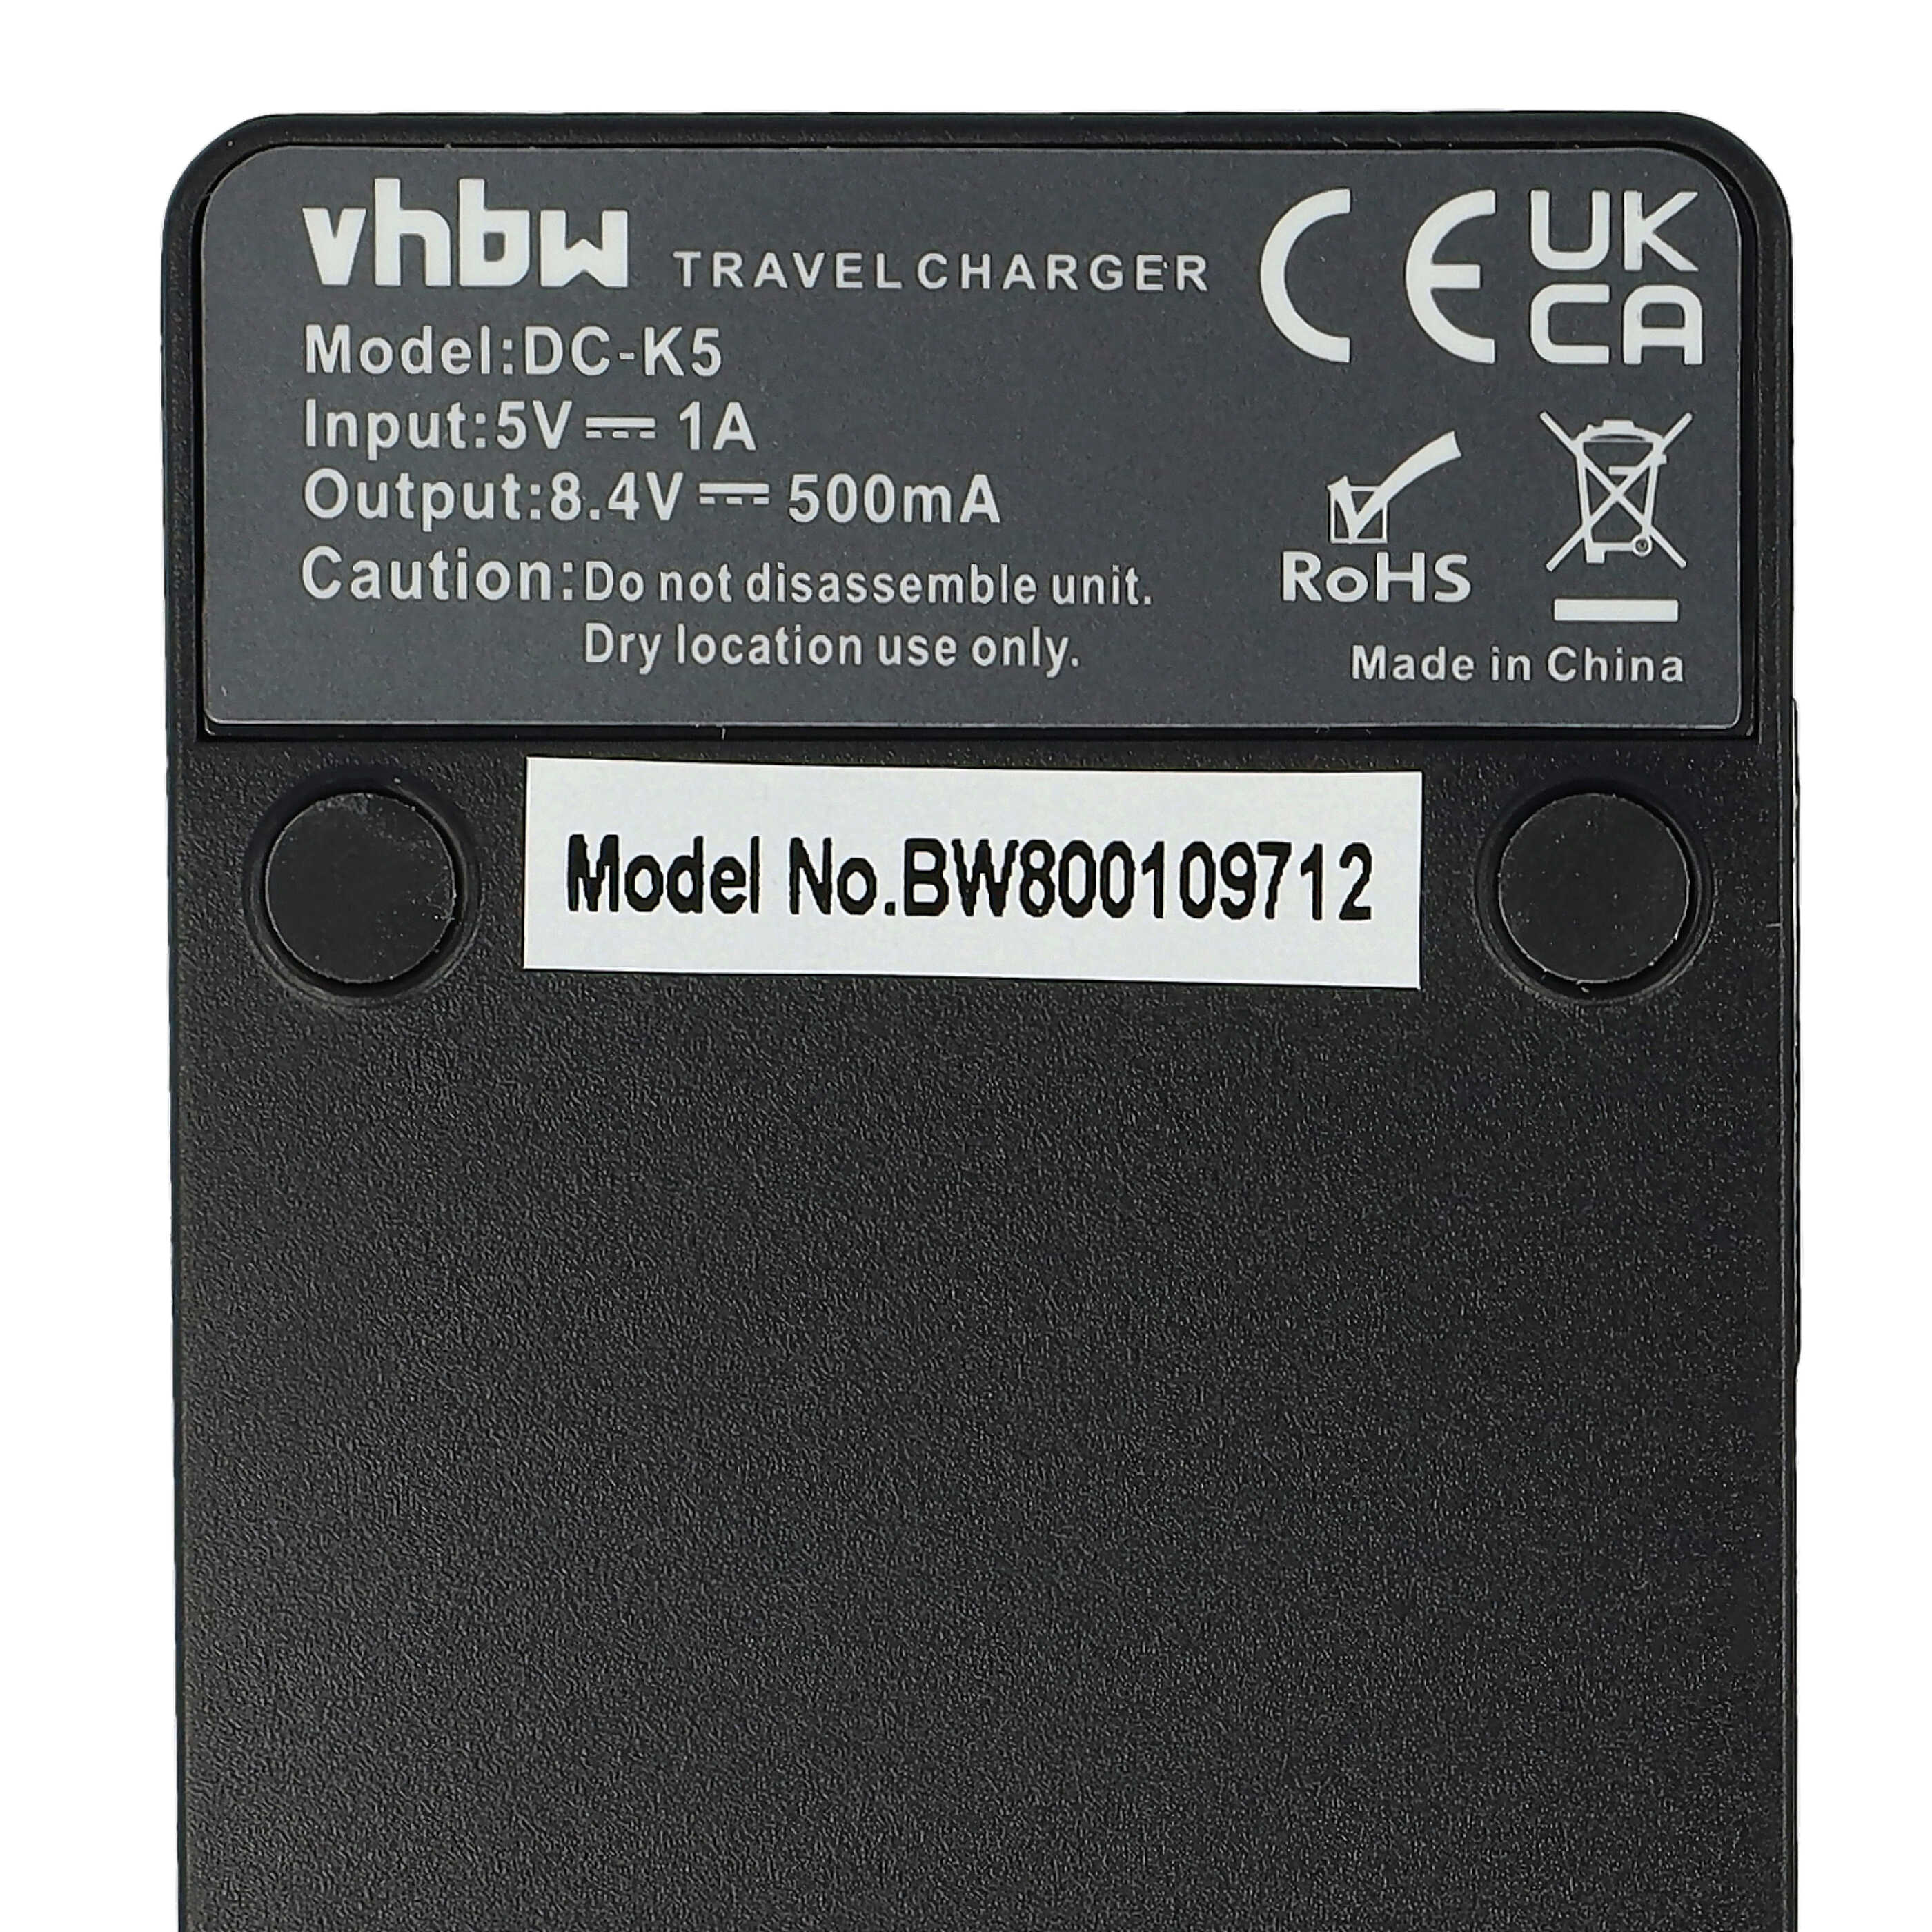 Battery Charger replaces Sony BC-VM10 suitable for Grundig BP-10 Camera etc. - 0.5 A, 8.4 V